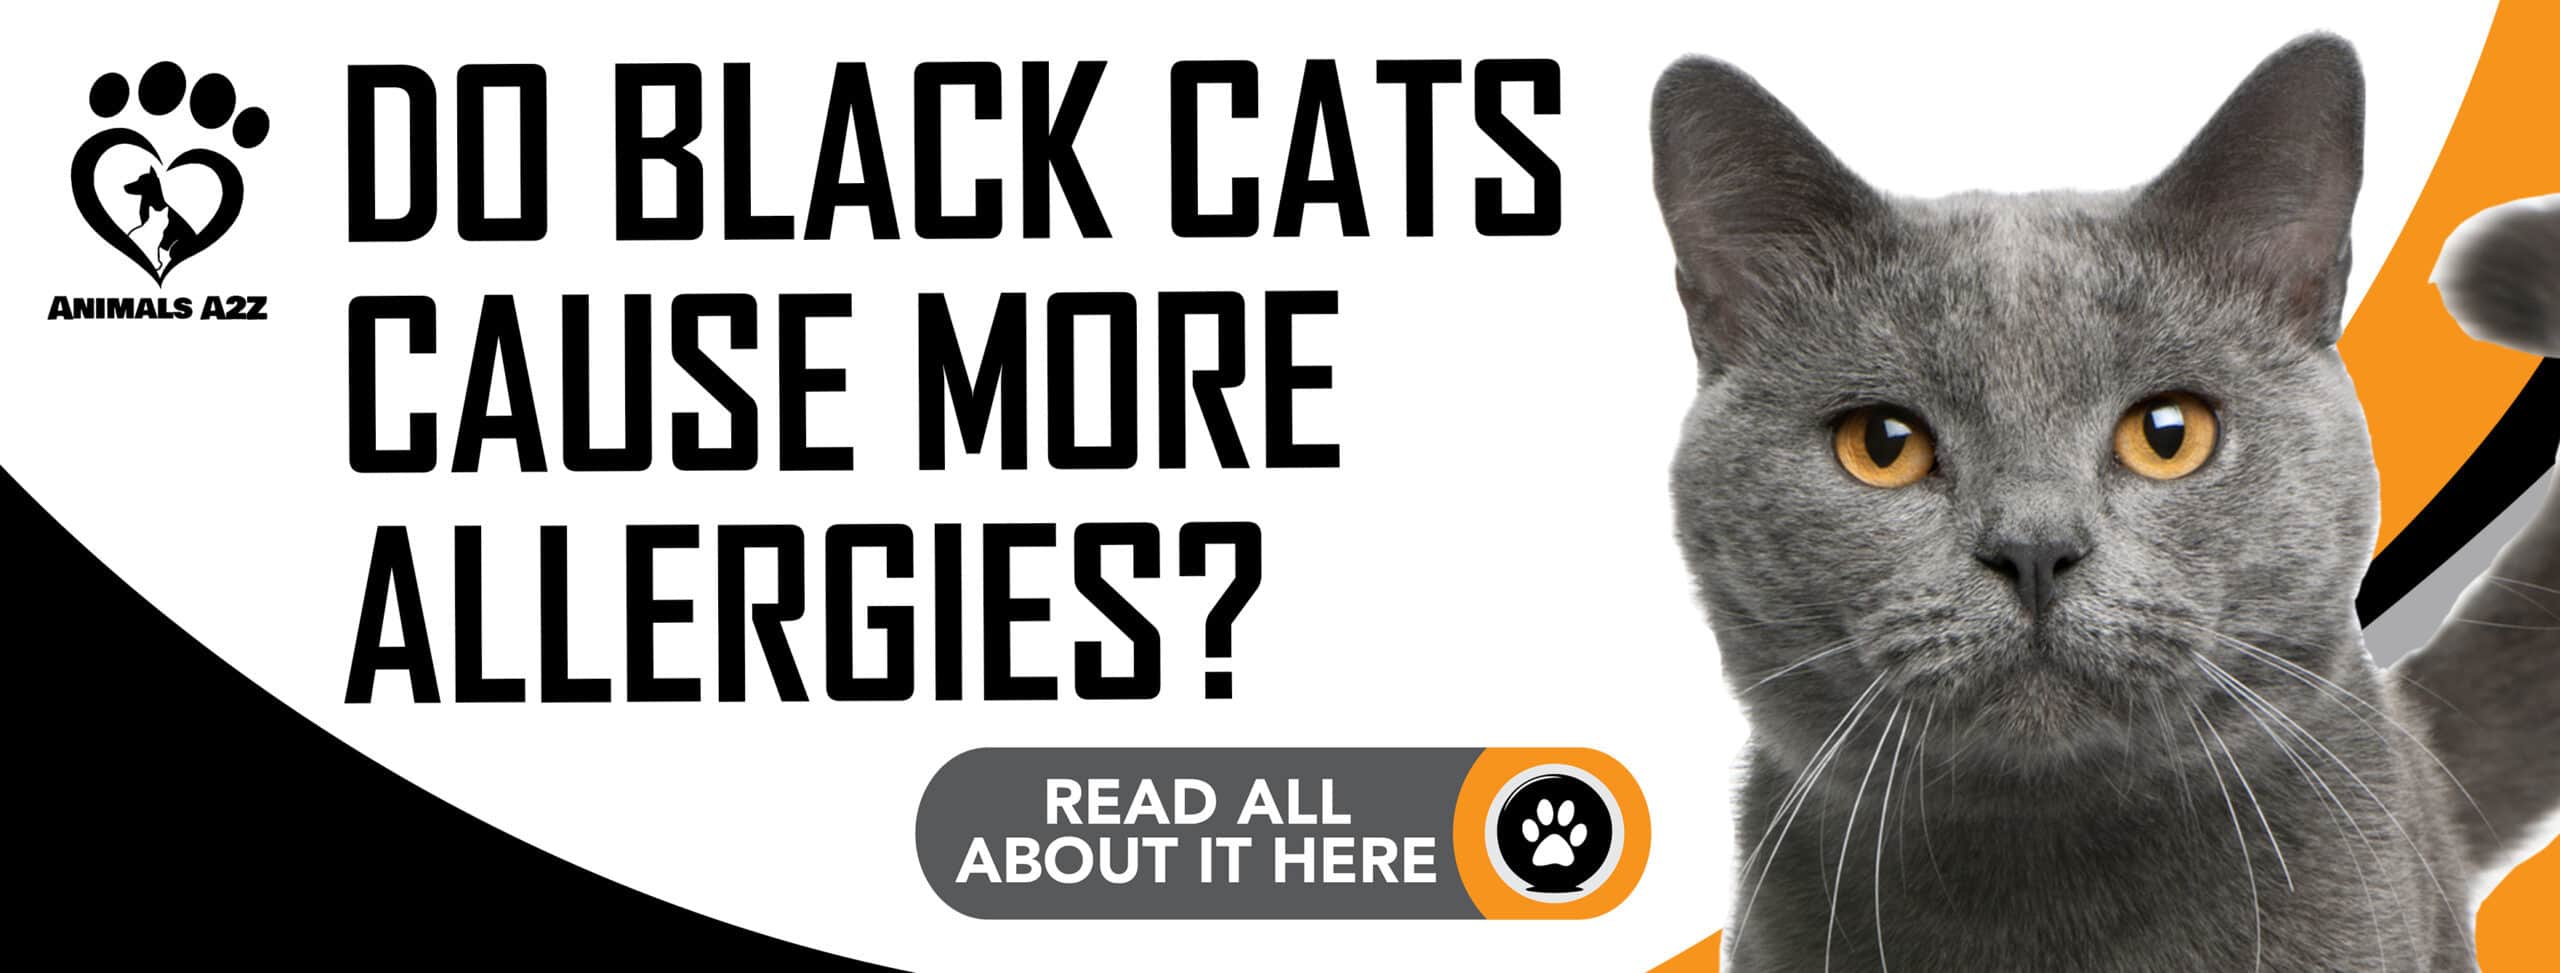 Do black cats cause more allergies